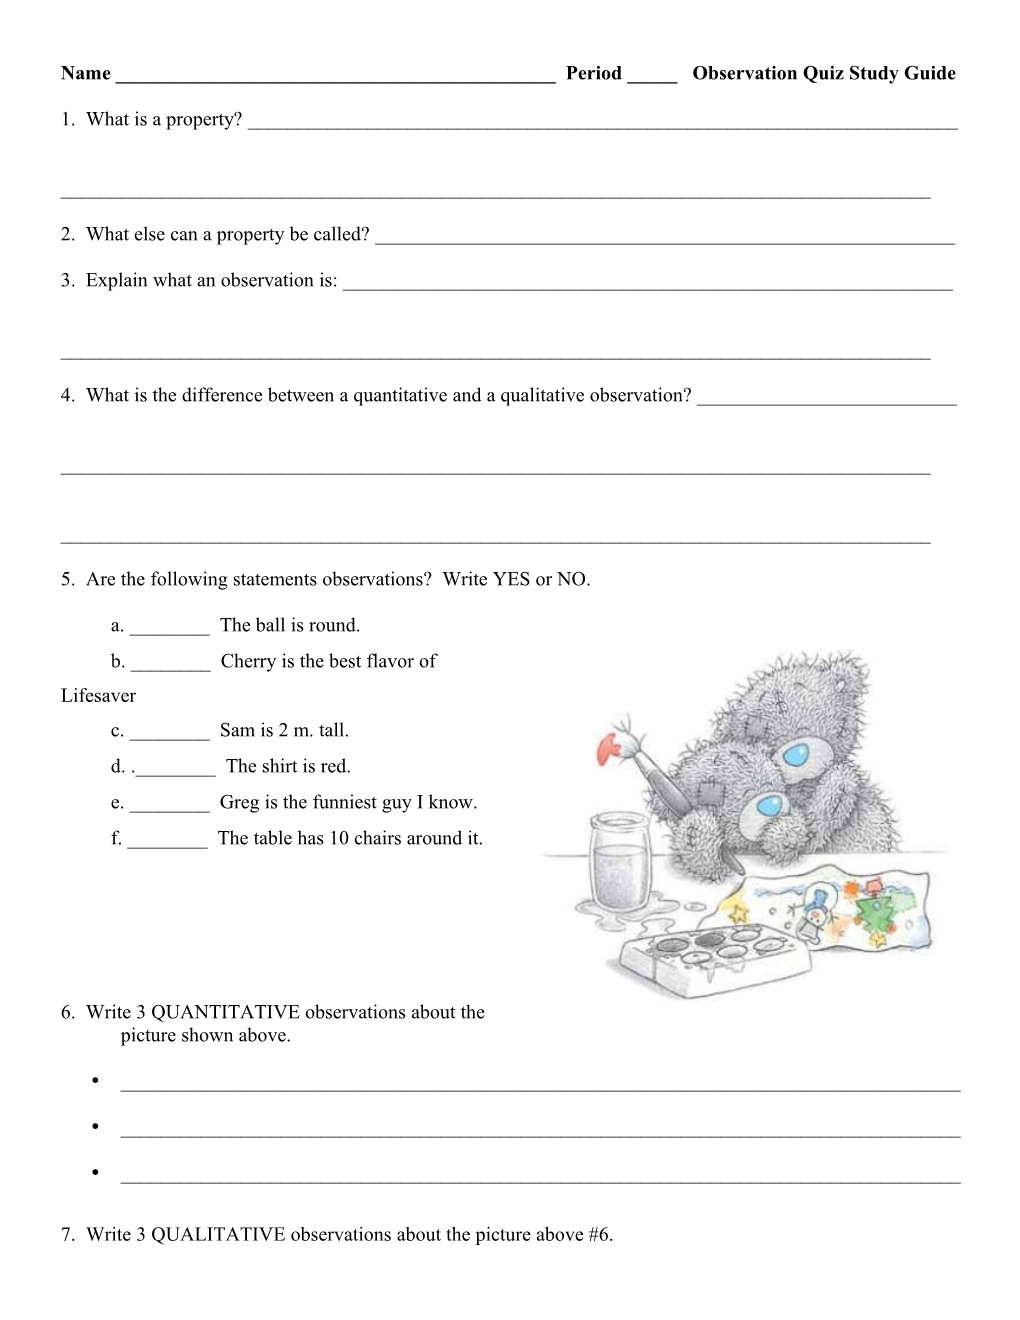 Name ______ Period _____ Observation Quiz Study Guide